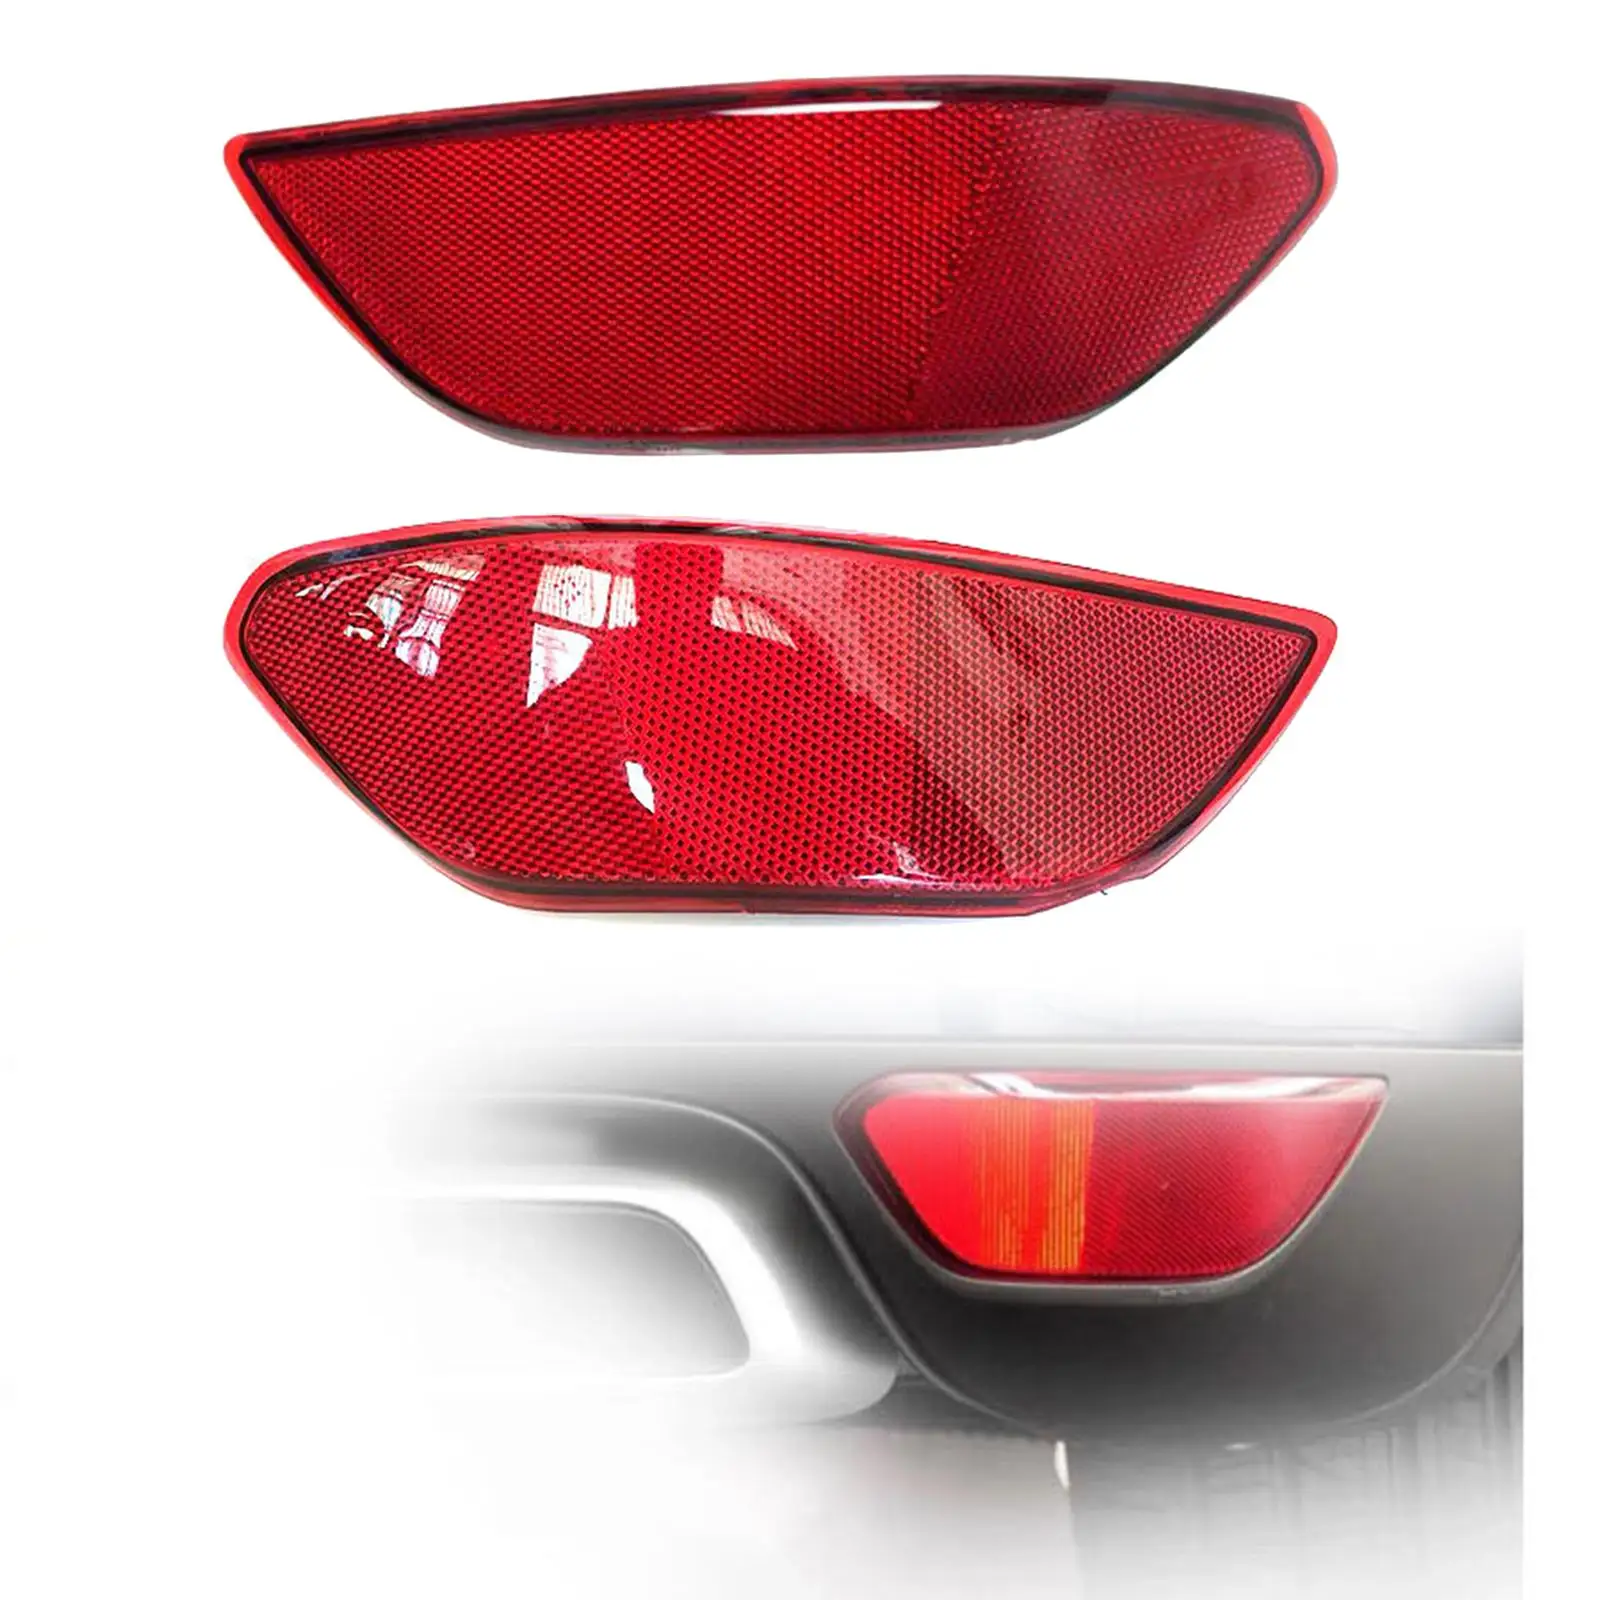 Reflector for Car Rear Rear Bumper Trim Reflector Light Lamp Replacement for Porsche Cayenne Easy Installation Spare Parts